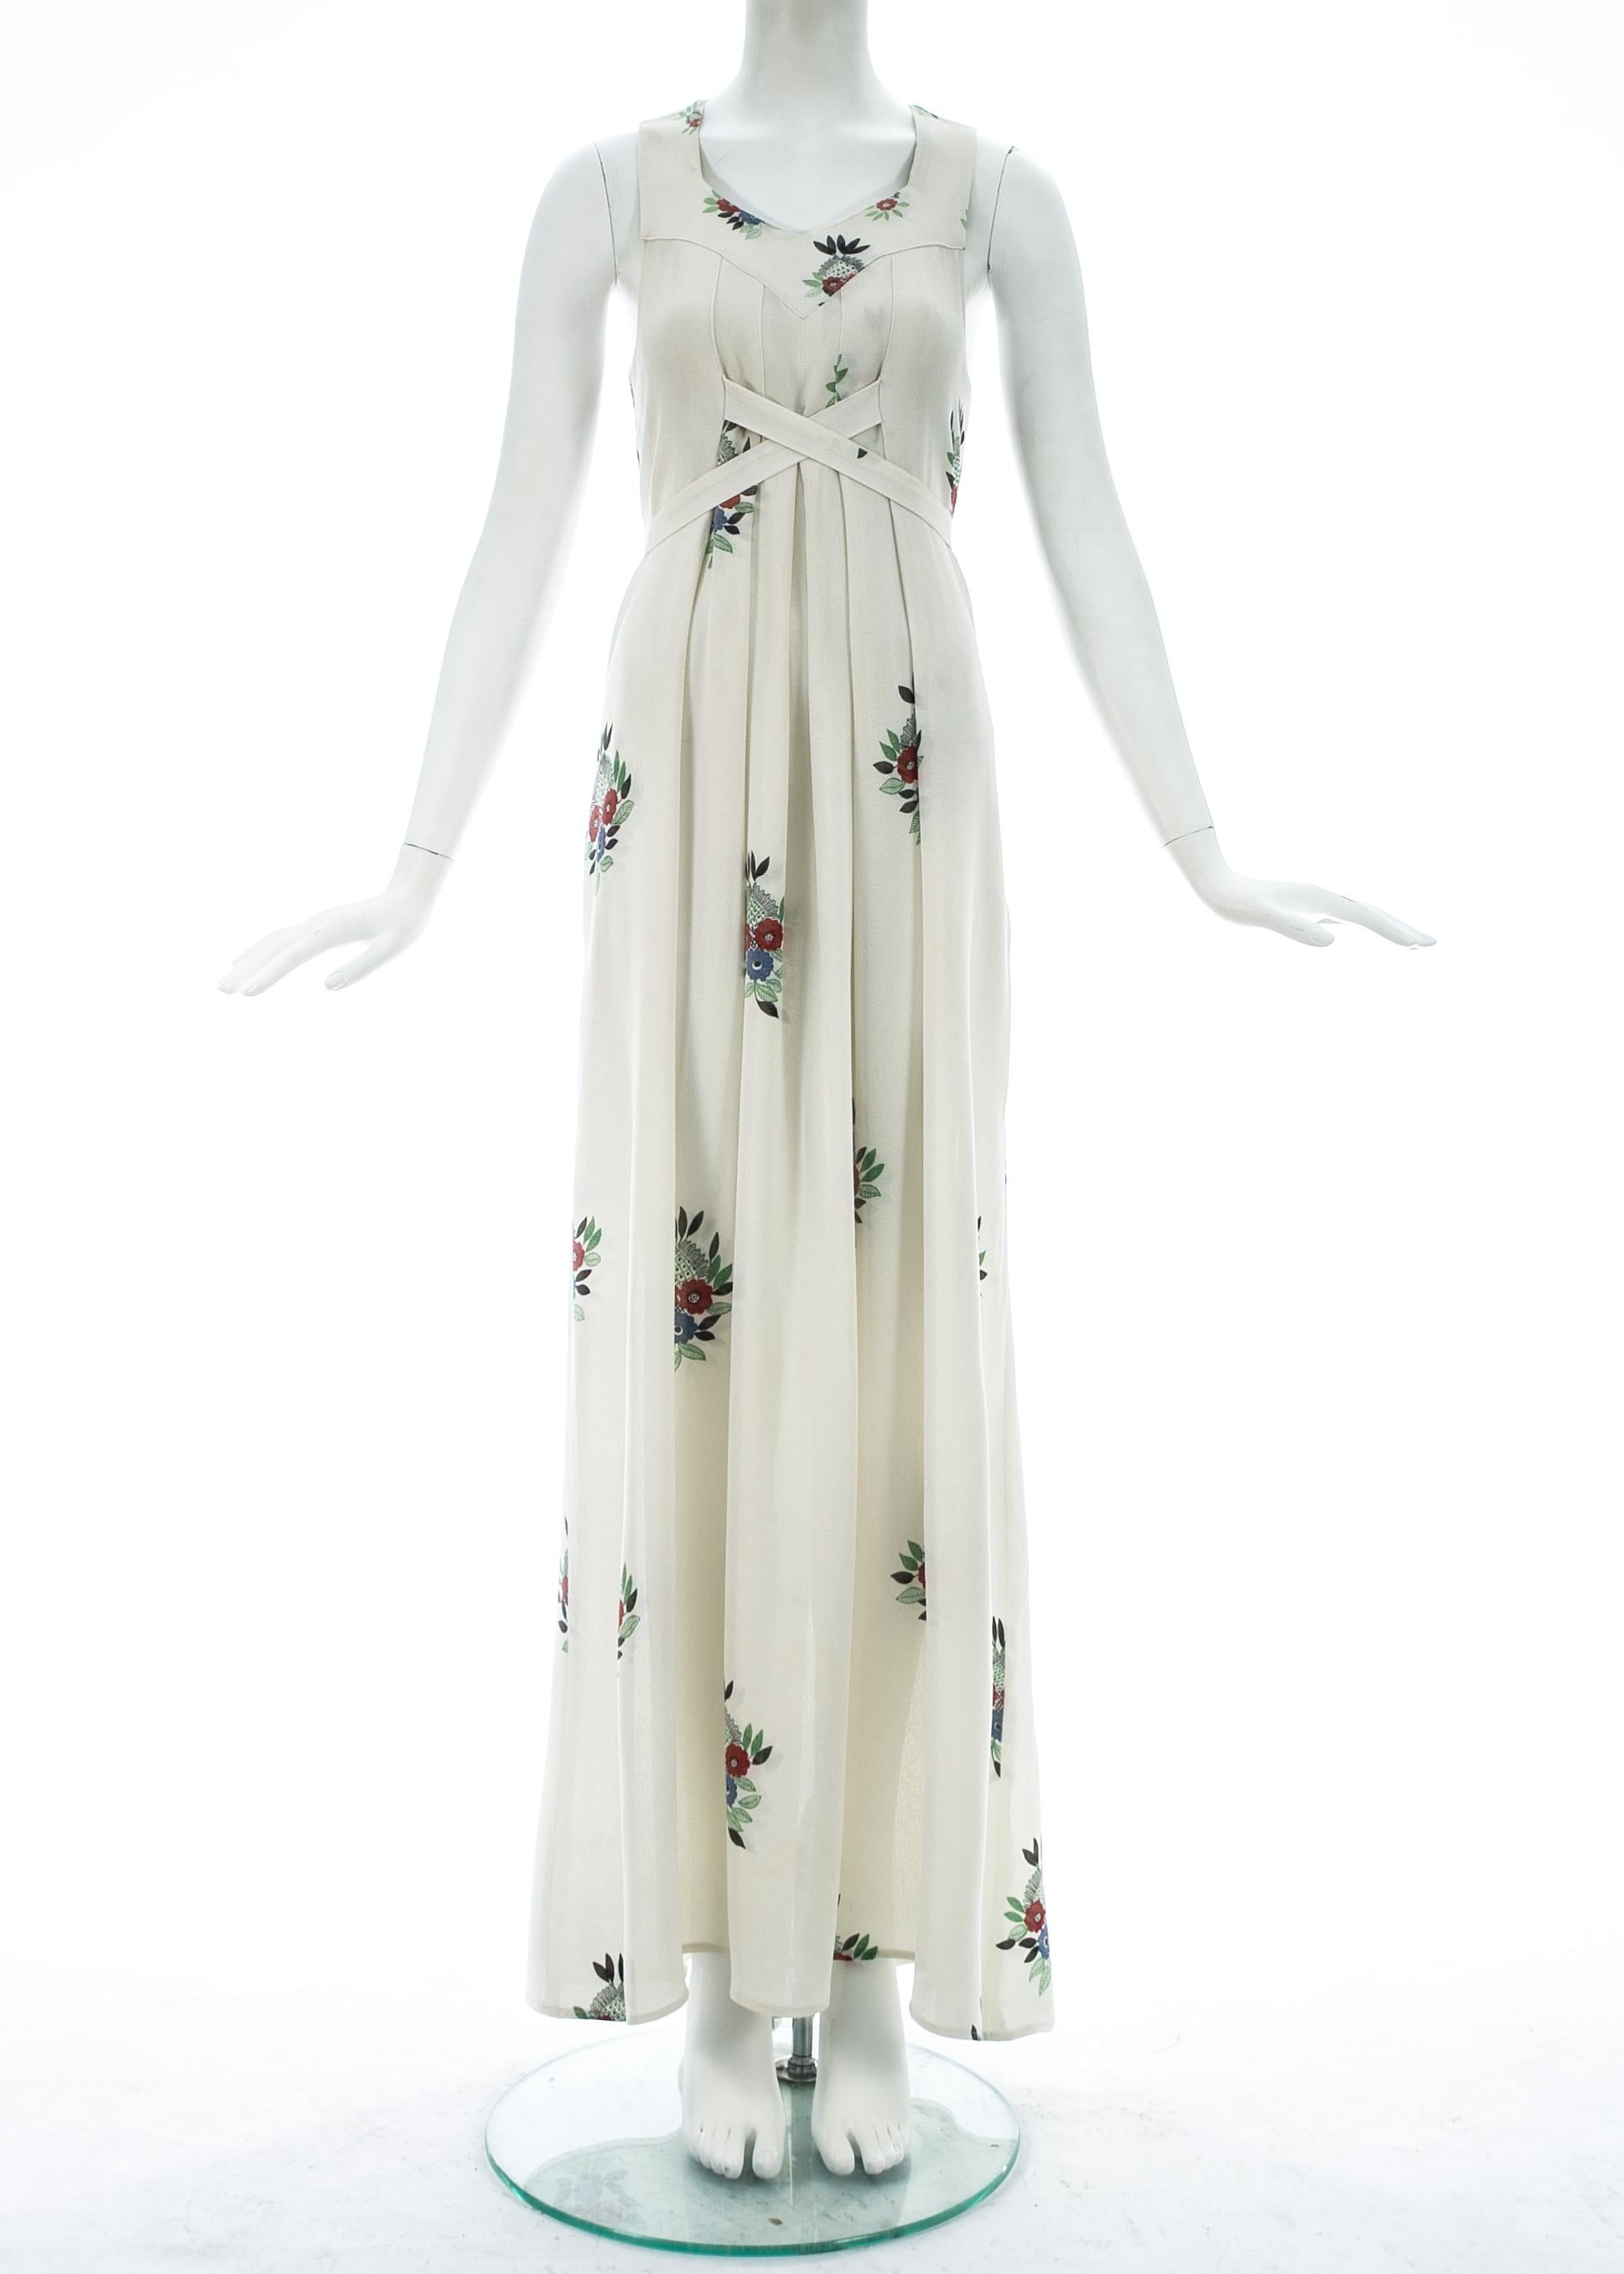 Ossie Clark

- Sleeveless maxi dress 
- Cross-over fastening on the waist
- Celia Birtwell floral print throughout

c. 1970s